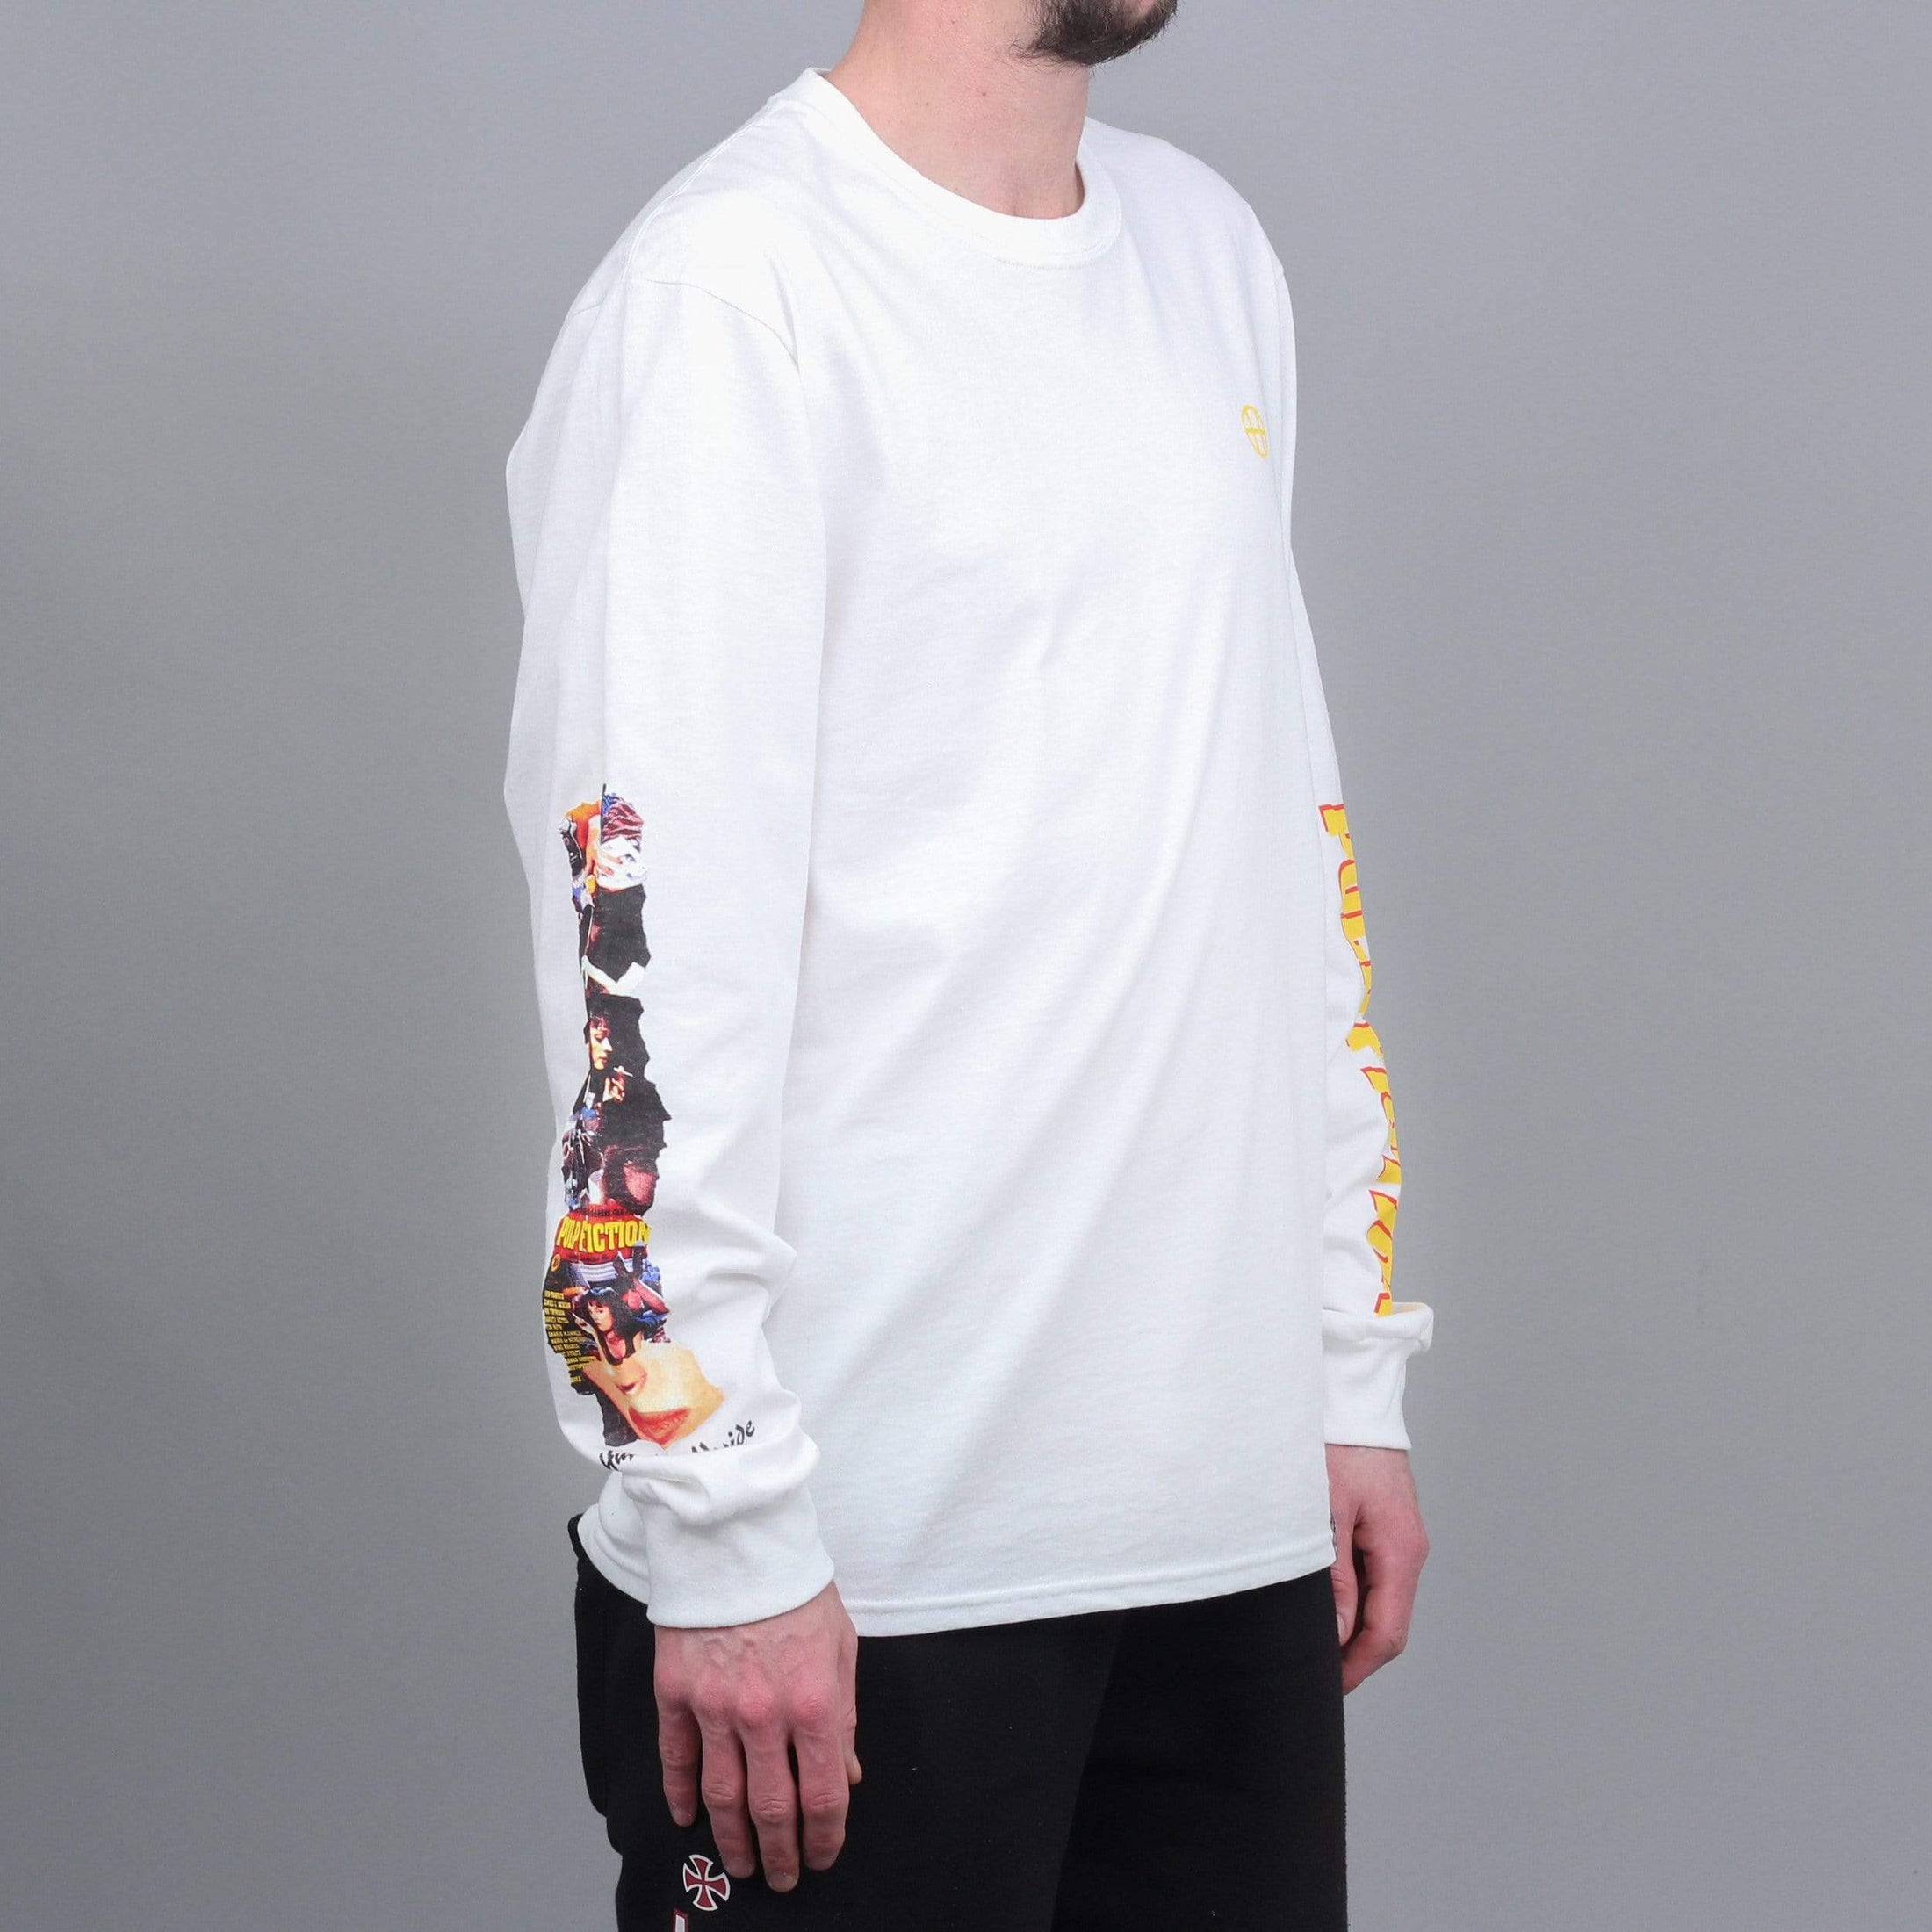 HUF x Pulp Fiction Collage Longsleeve T-Shirt White